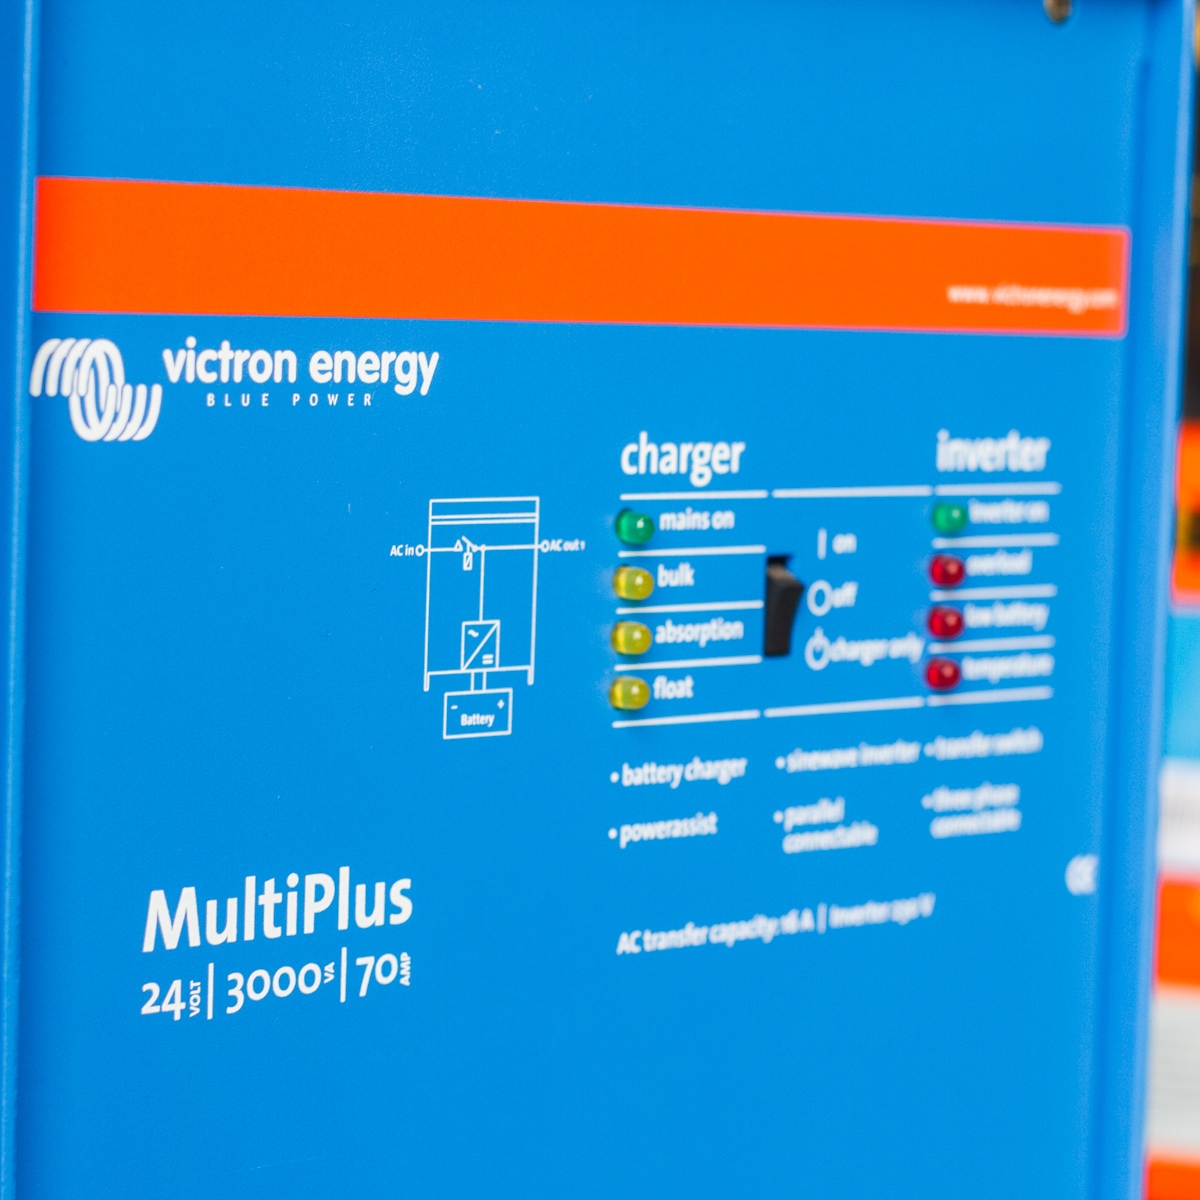 Close-up of a blue Victron MultiPlus 24V 3000VA Inverter/Charger device displaying status lights and control labels.